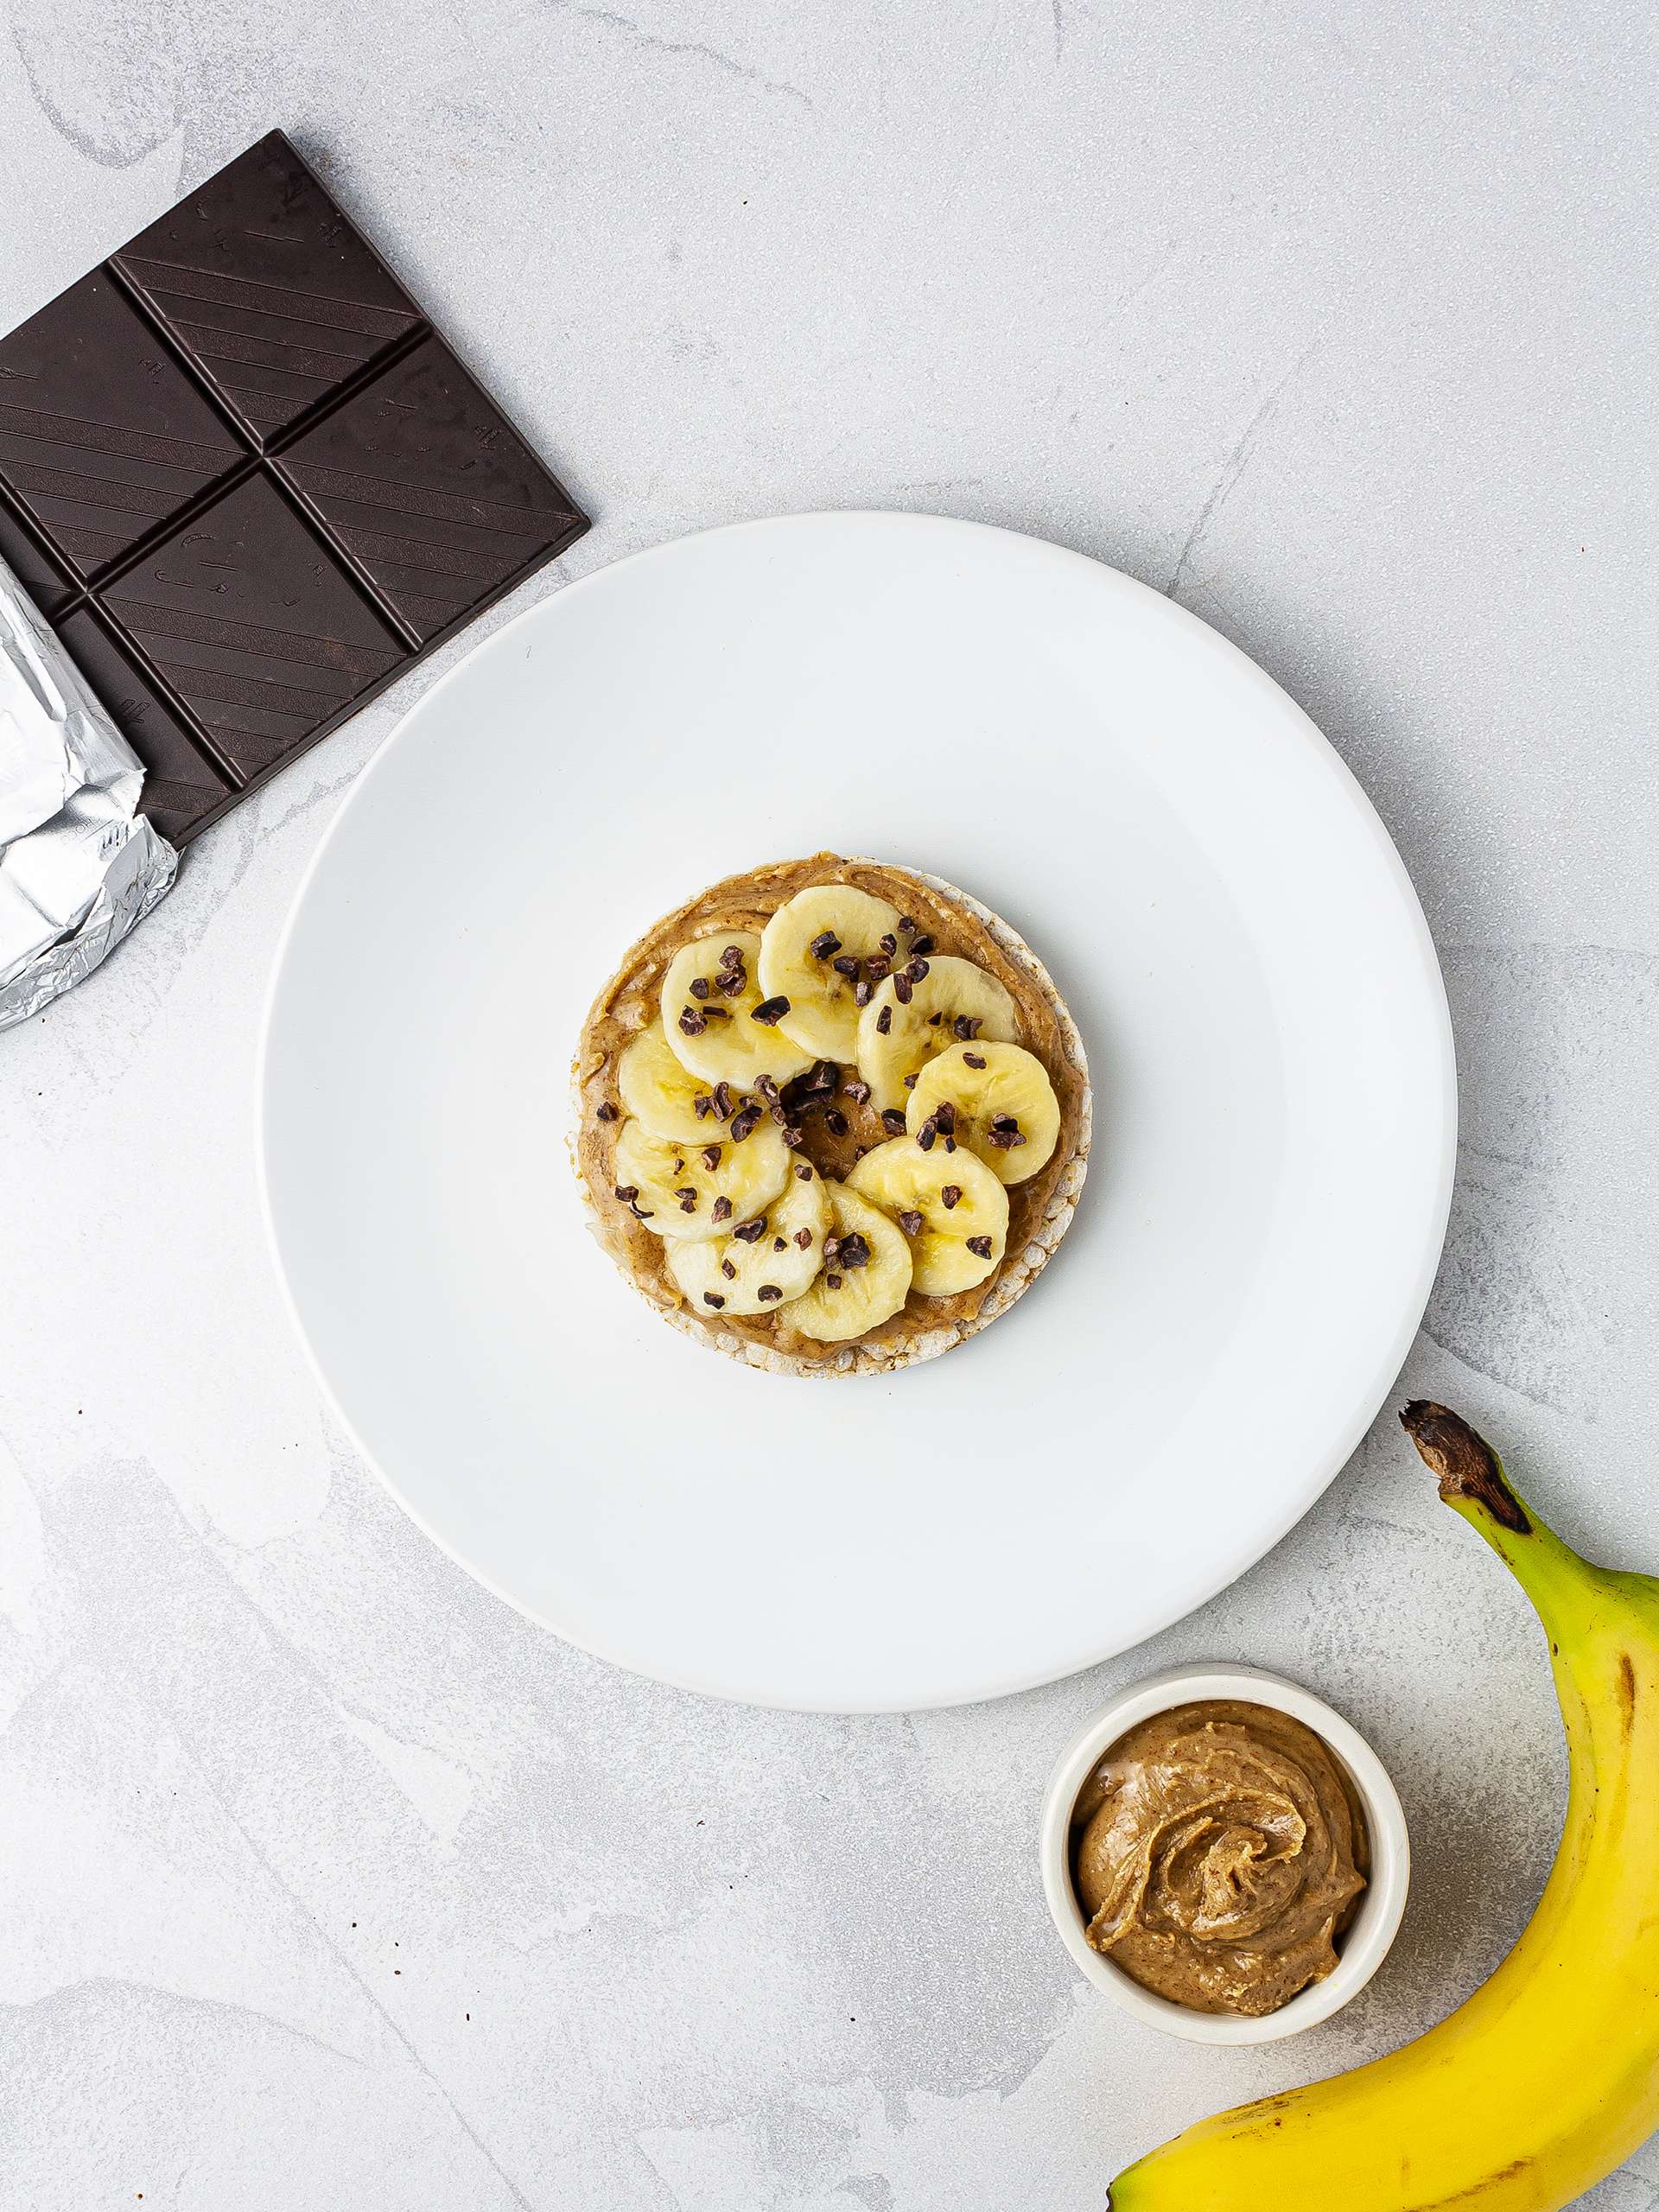 Rice cake with almond butter, sliced banana and chocolate chips.